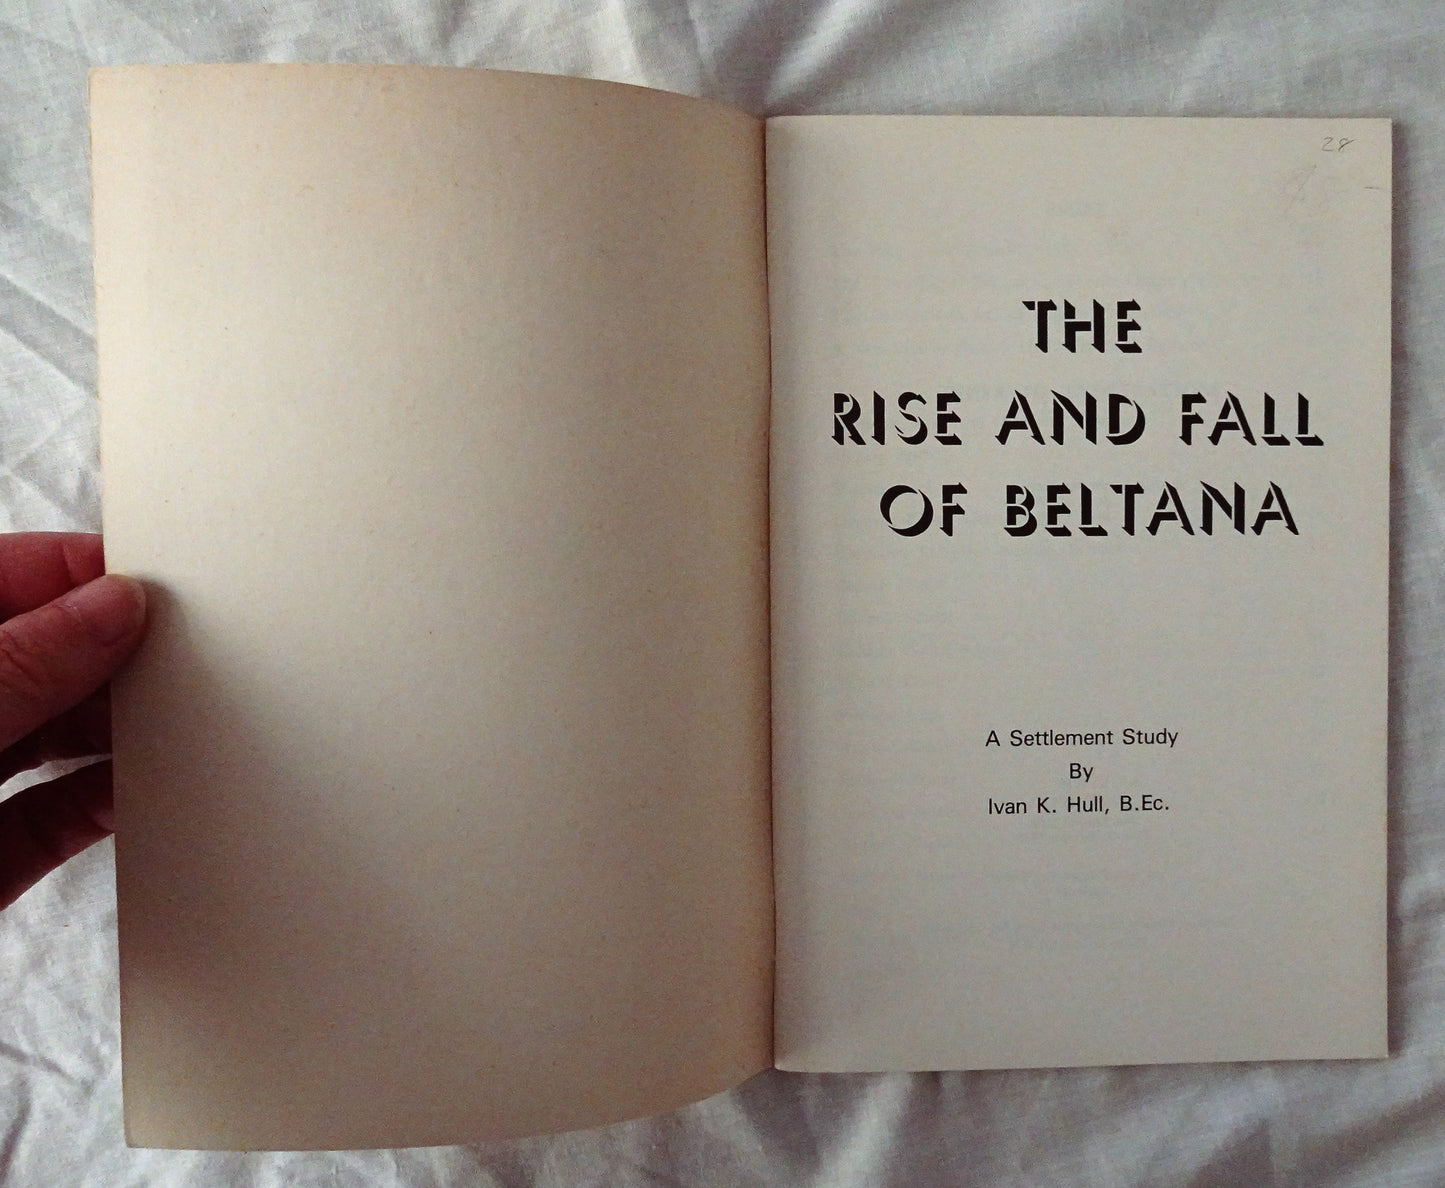 The Rise and Fall of Beltana by Ivan K. Hull